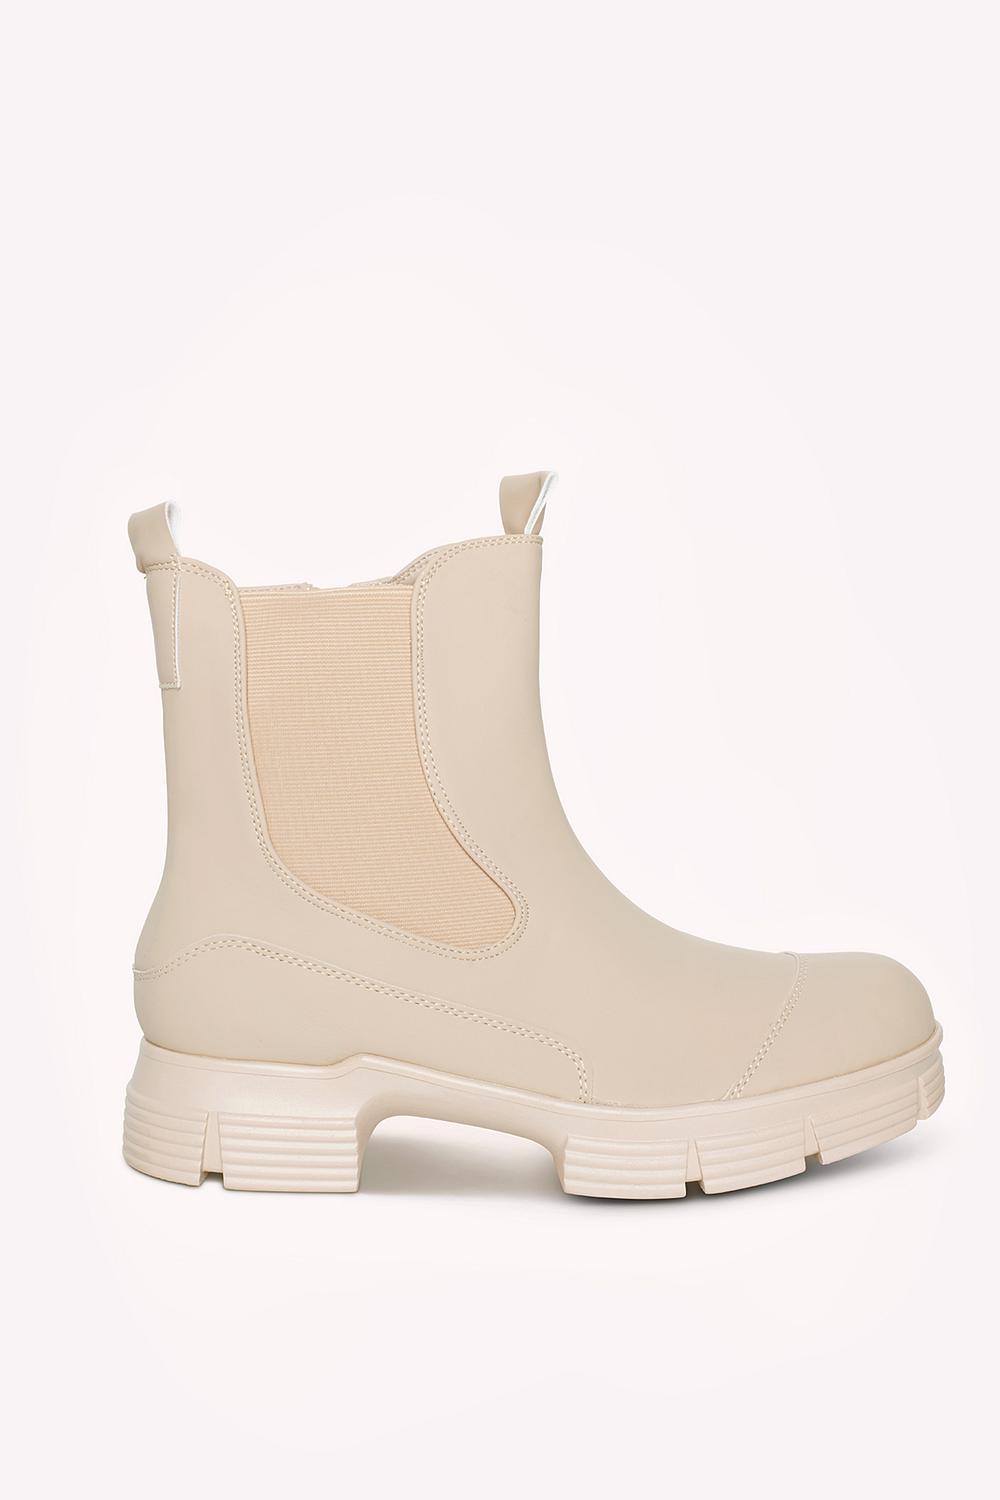 Offwhite boots